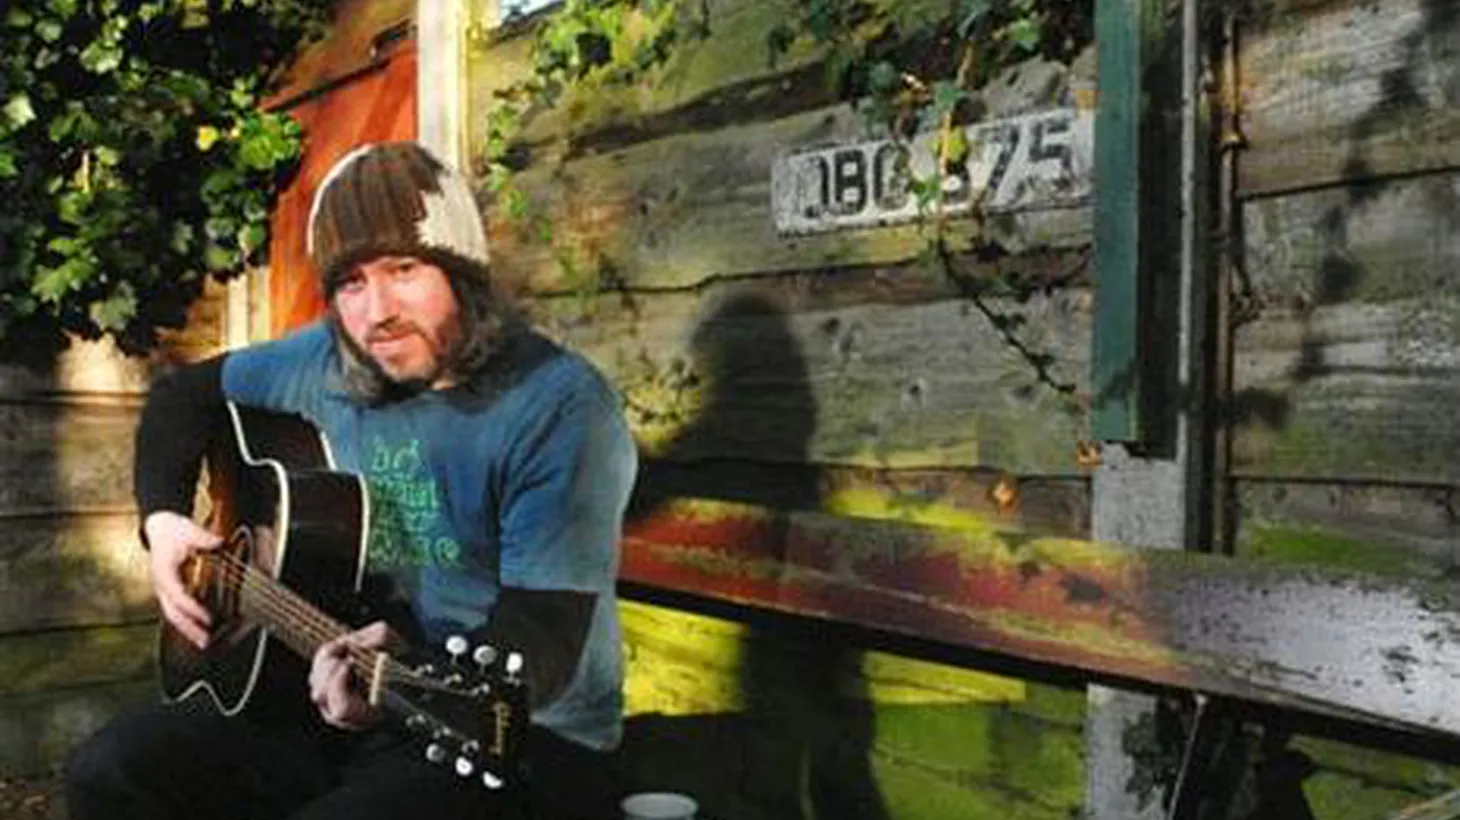 UK singer Badly Drawn Boy has a knack from storytelling, weaving his thoughts and experiences into intimate songs heavy with emotion. He performs new tracks when he joins Morning Becomes Eclectic at 11:15am.